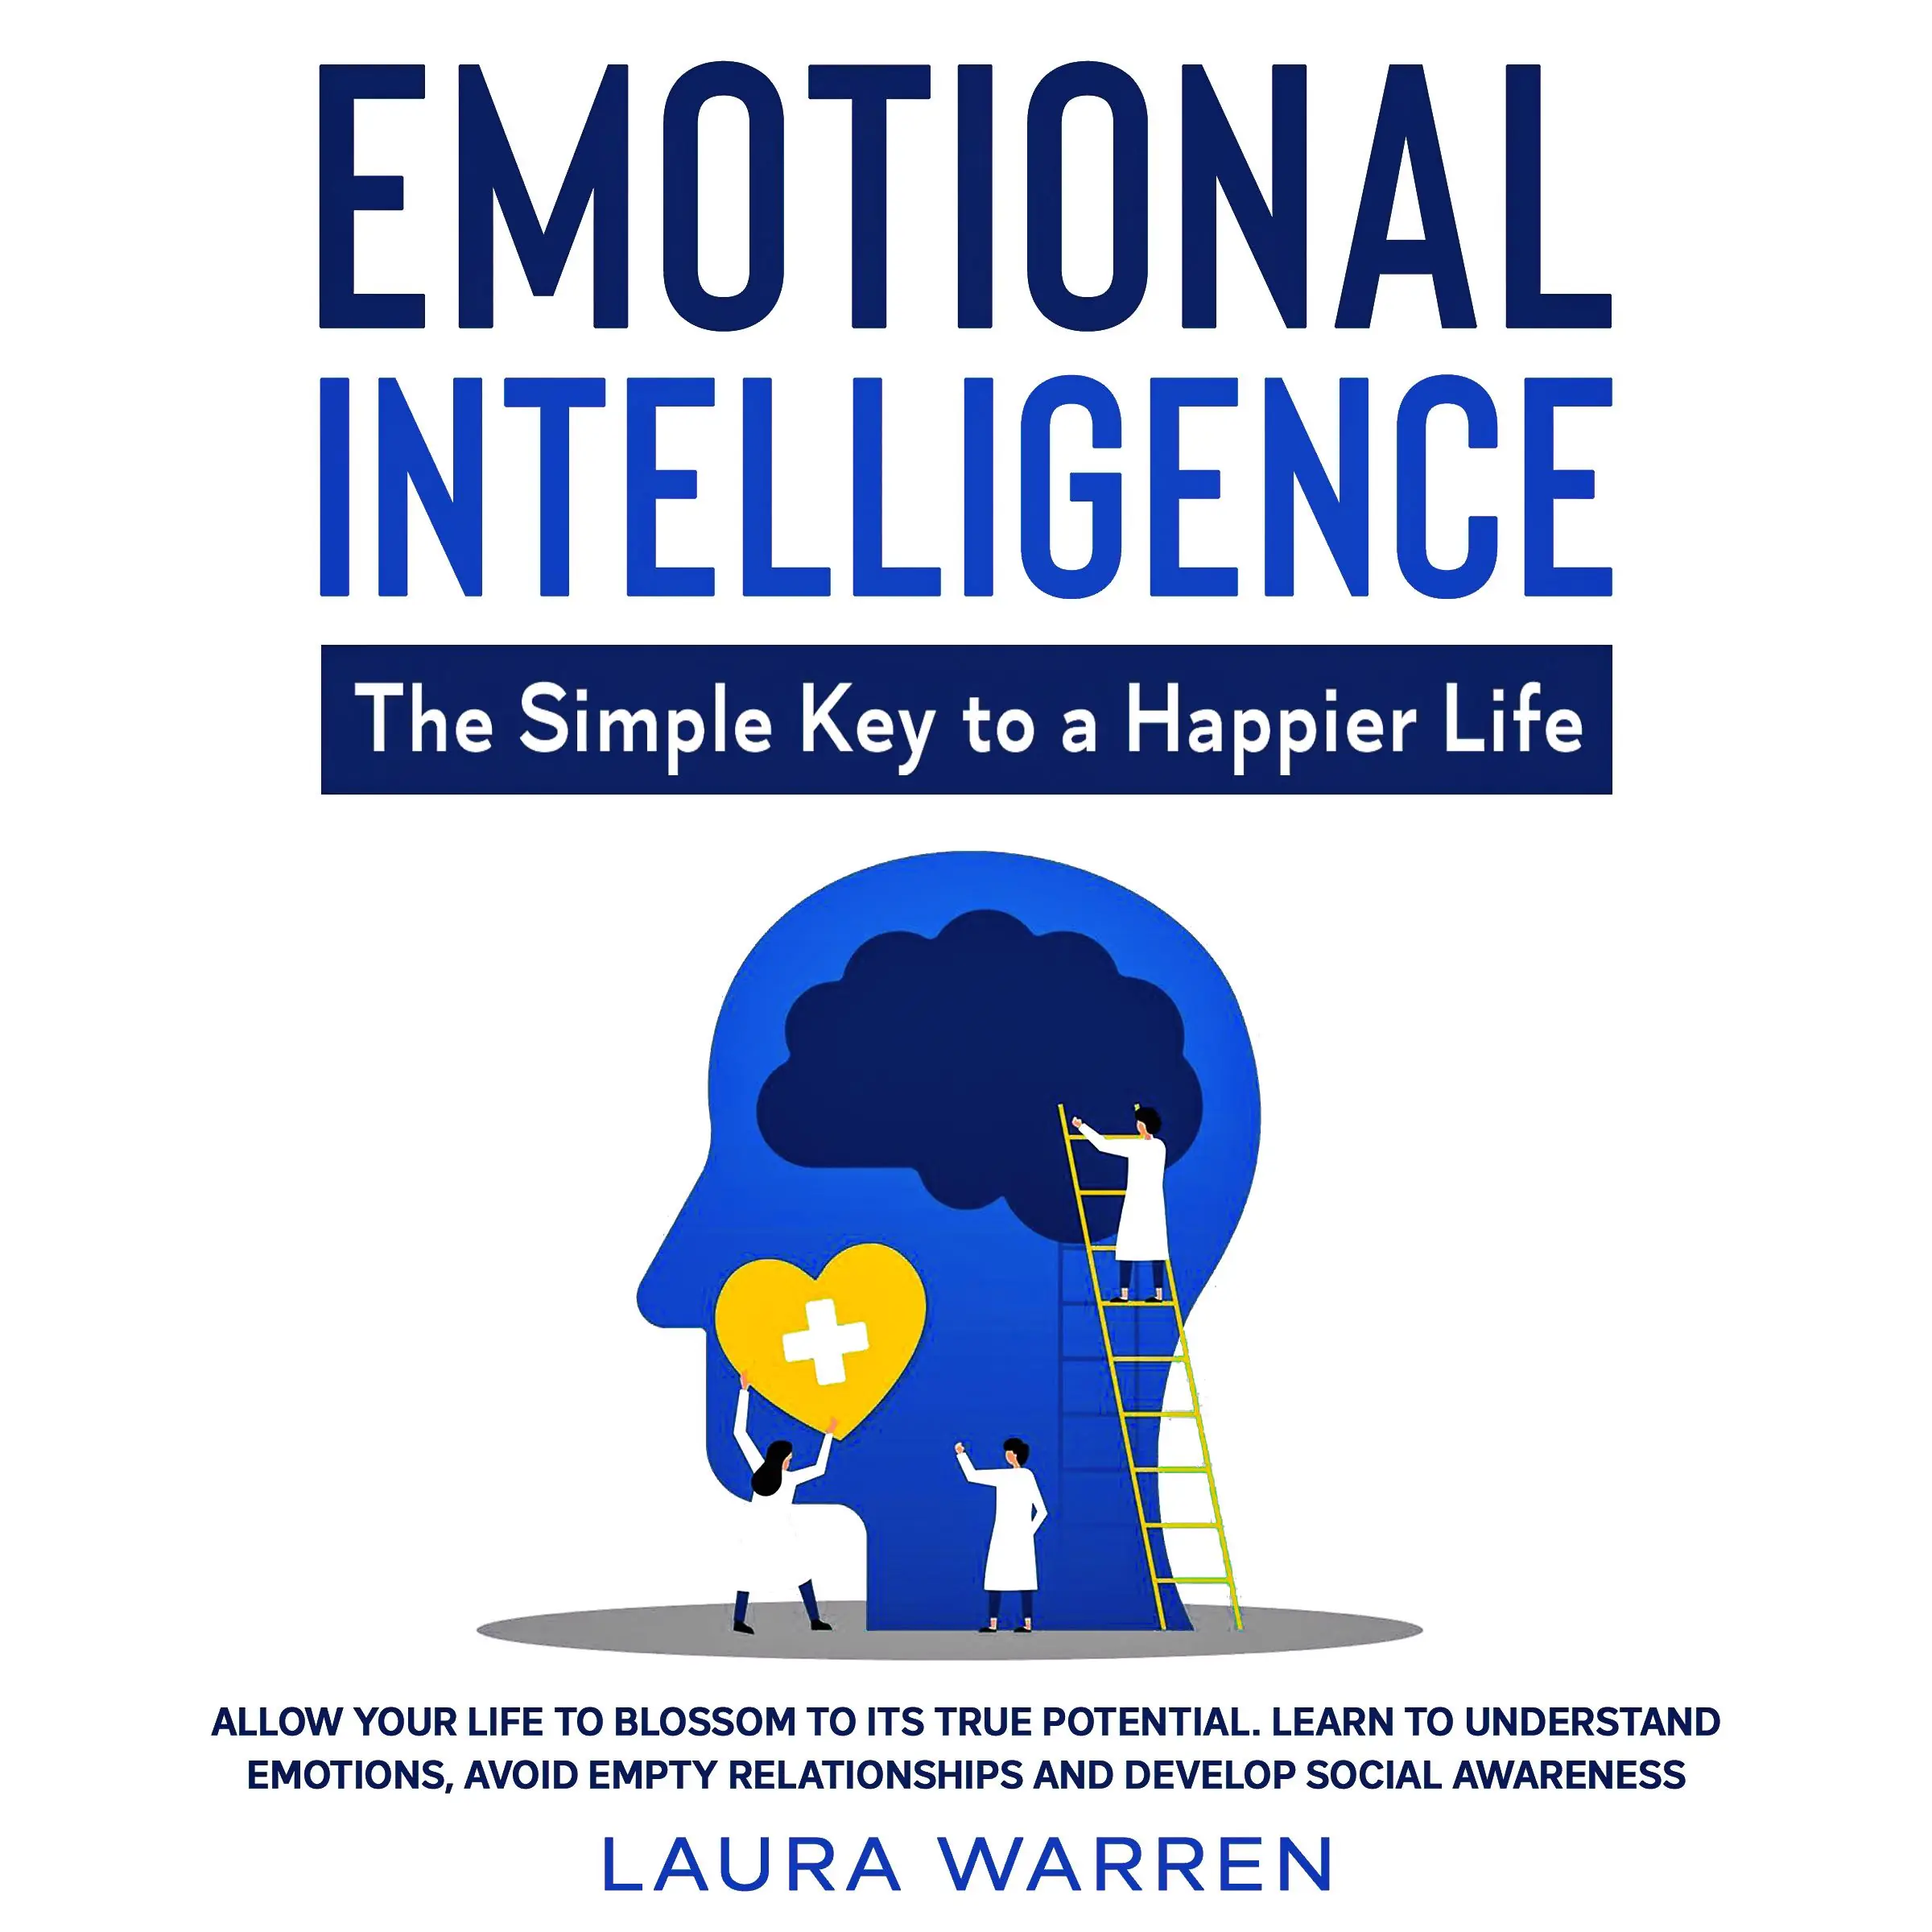 Emotional Intelligence: The Simple Key to a Happier Life Allow Your Life to Blossom to its True Potential. Learn to Understand Emotions, Avoid Empty Relationships and Develop Social Awareness Audiobook by Laura Warren